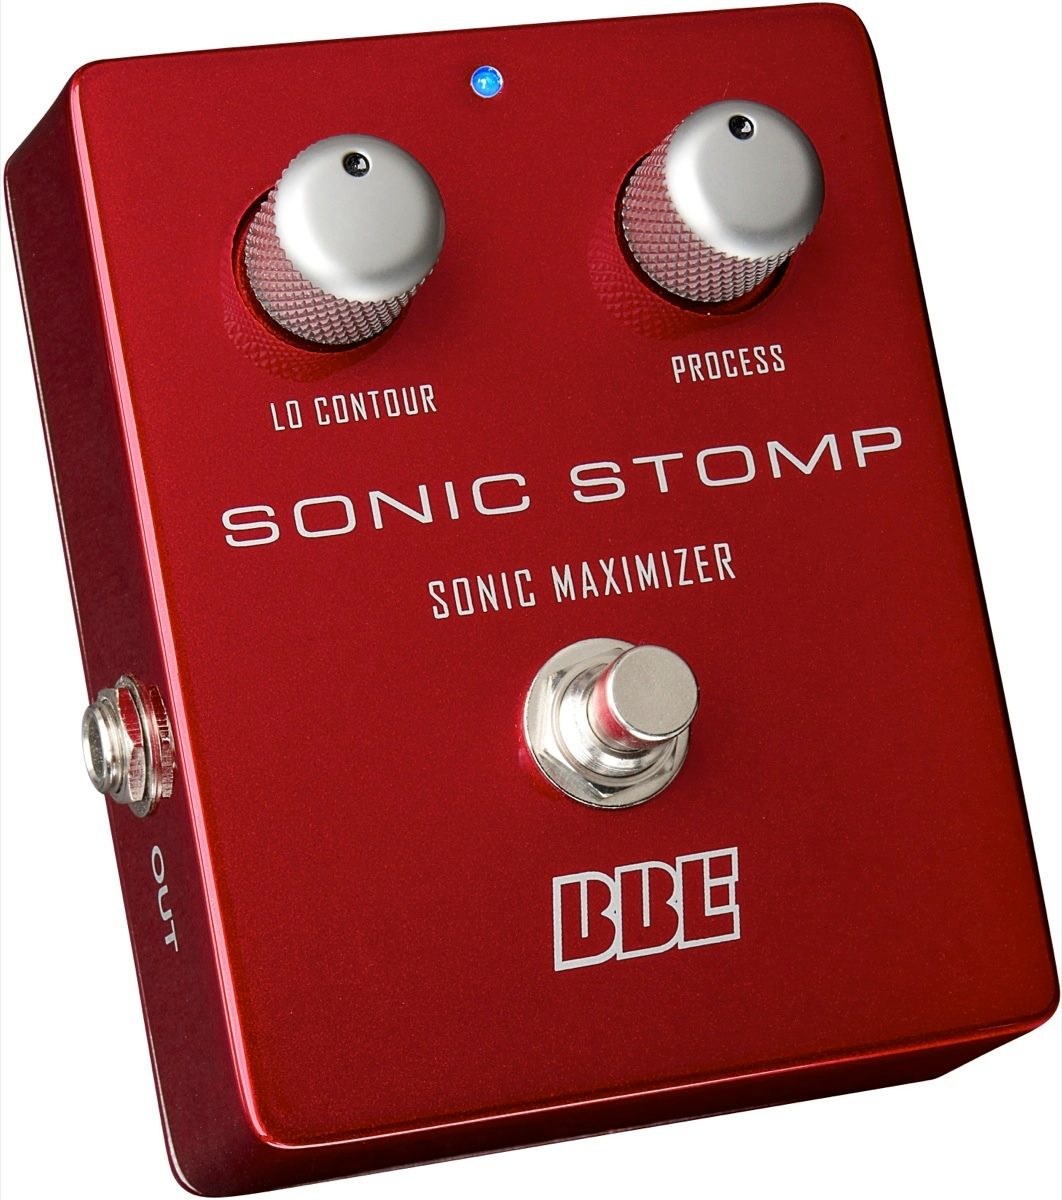 BBE Sonic Stomp Maximizer Guitar Pedal | zZounds